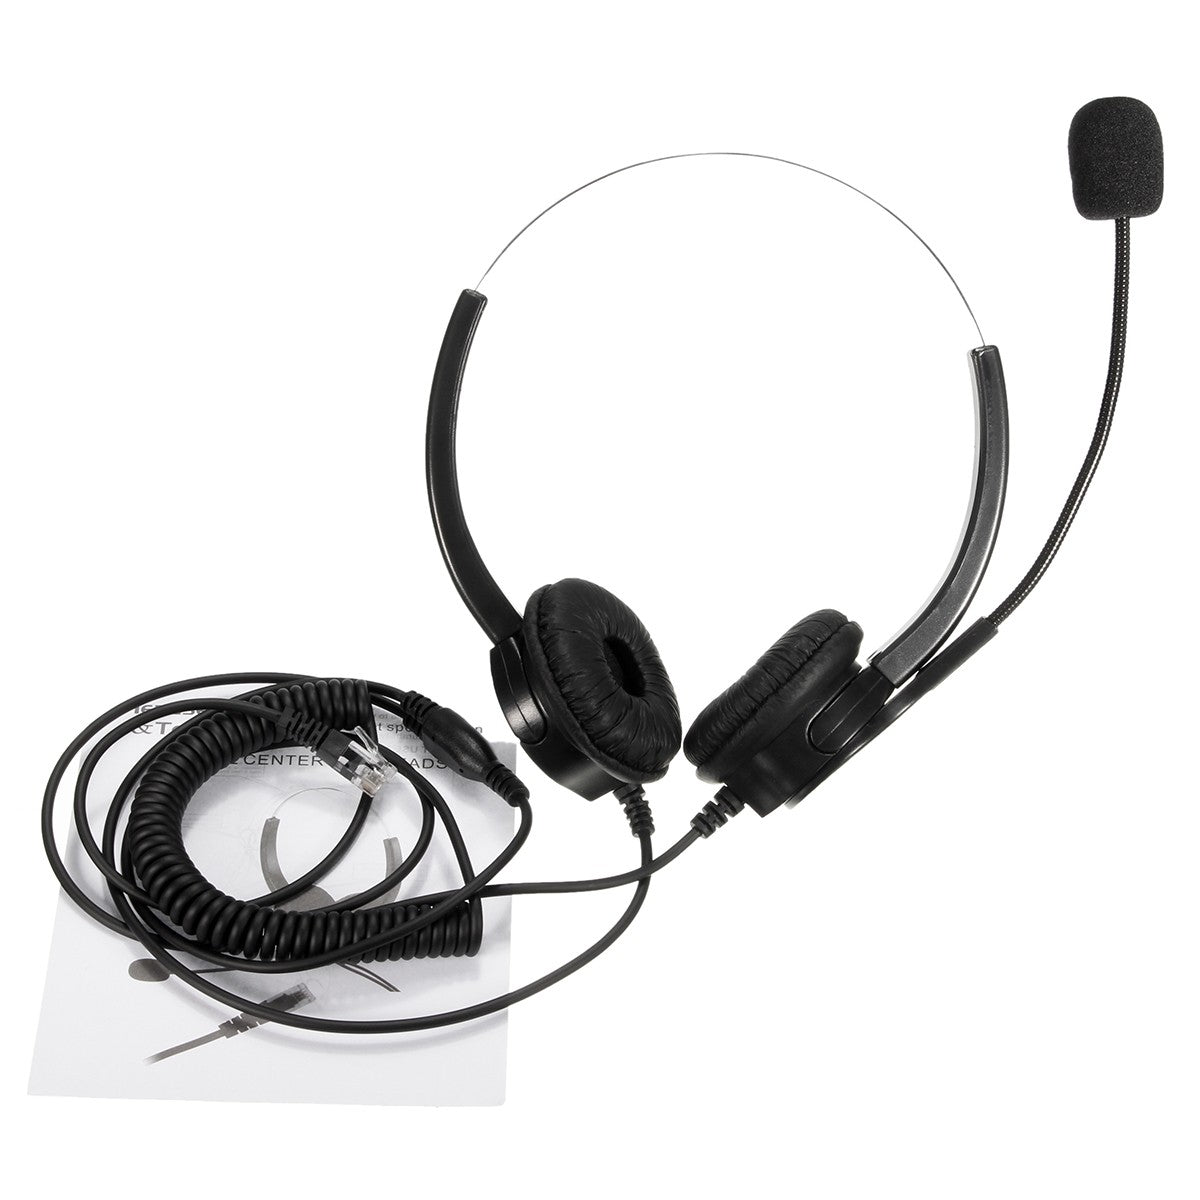 RJ11 Call Center Headset Telephone Corded Wired Microphone Office Head Phone 